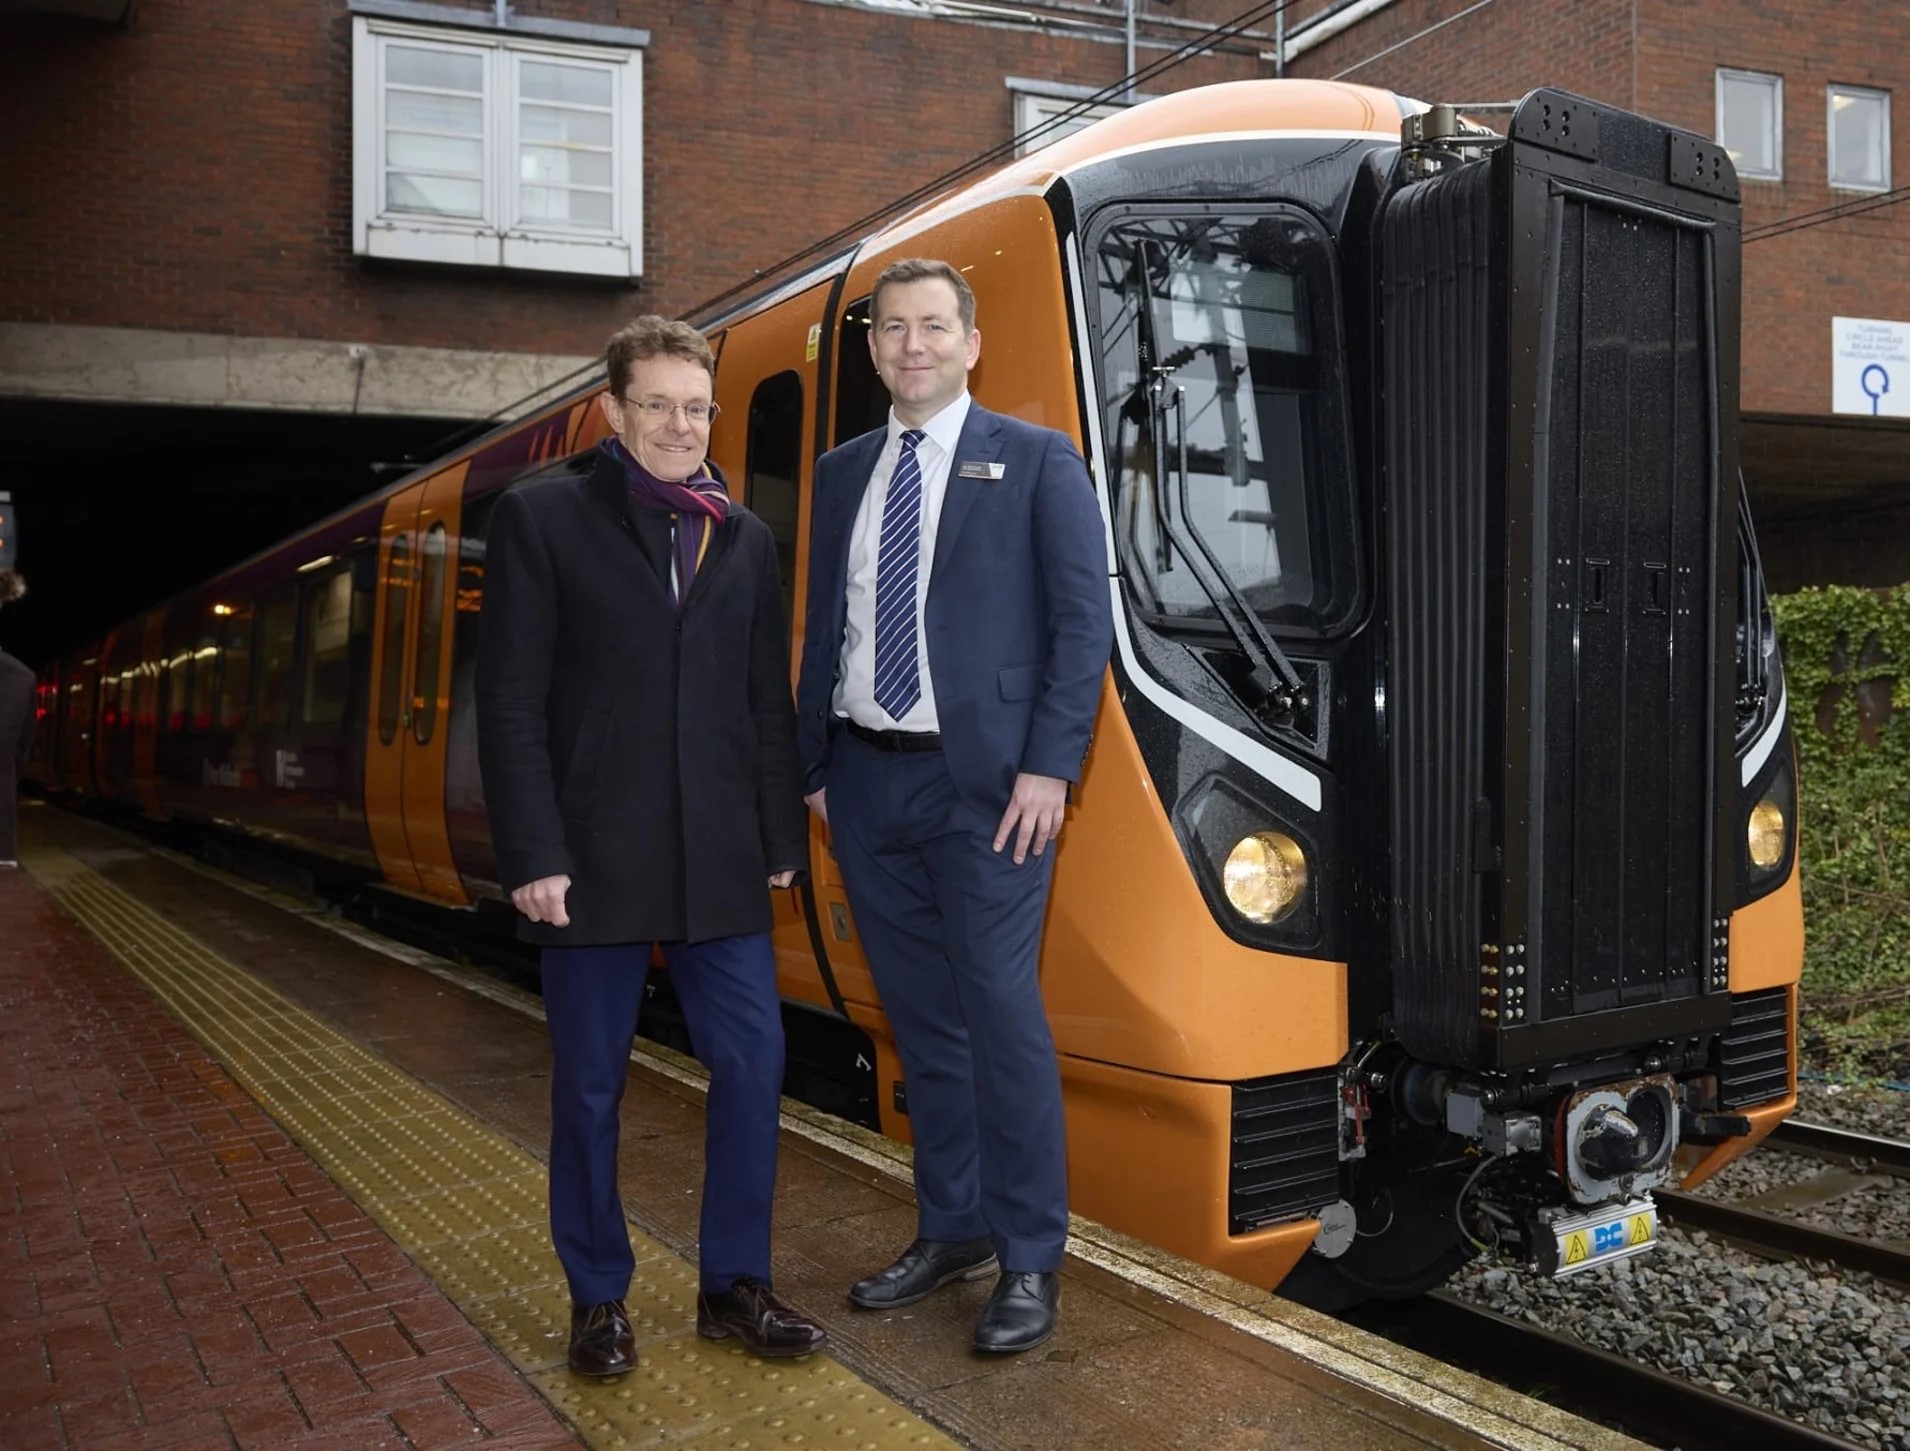 Mayor and West Midlands Railway managing director standing next to one of the new electric trains